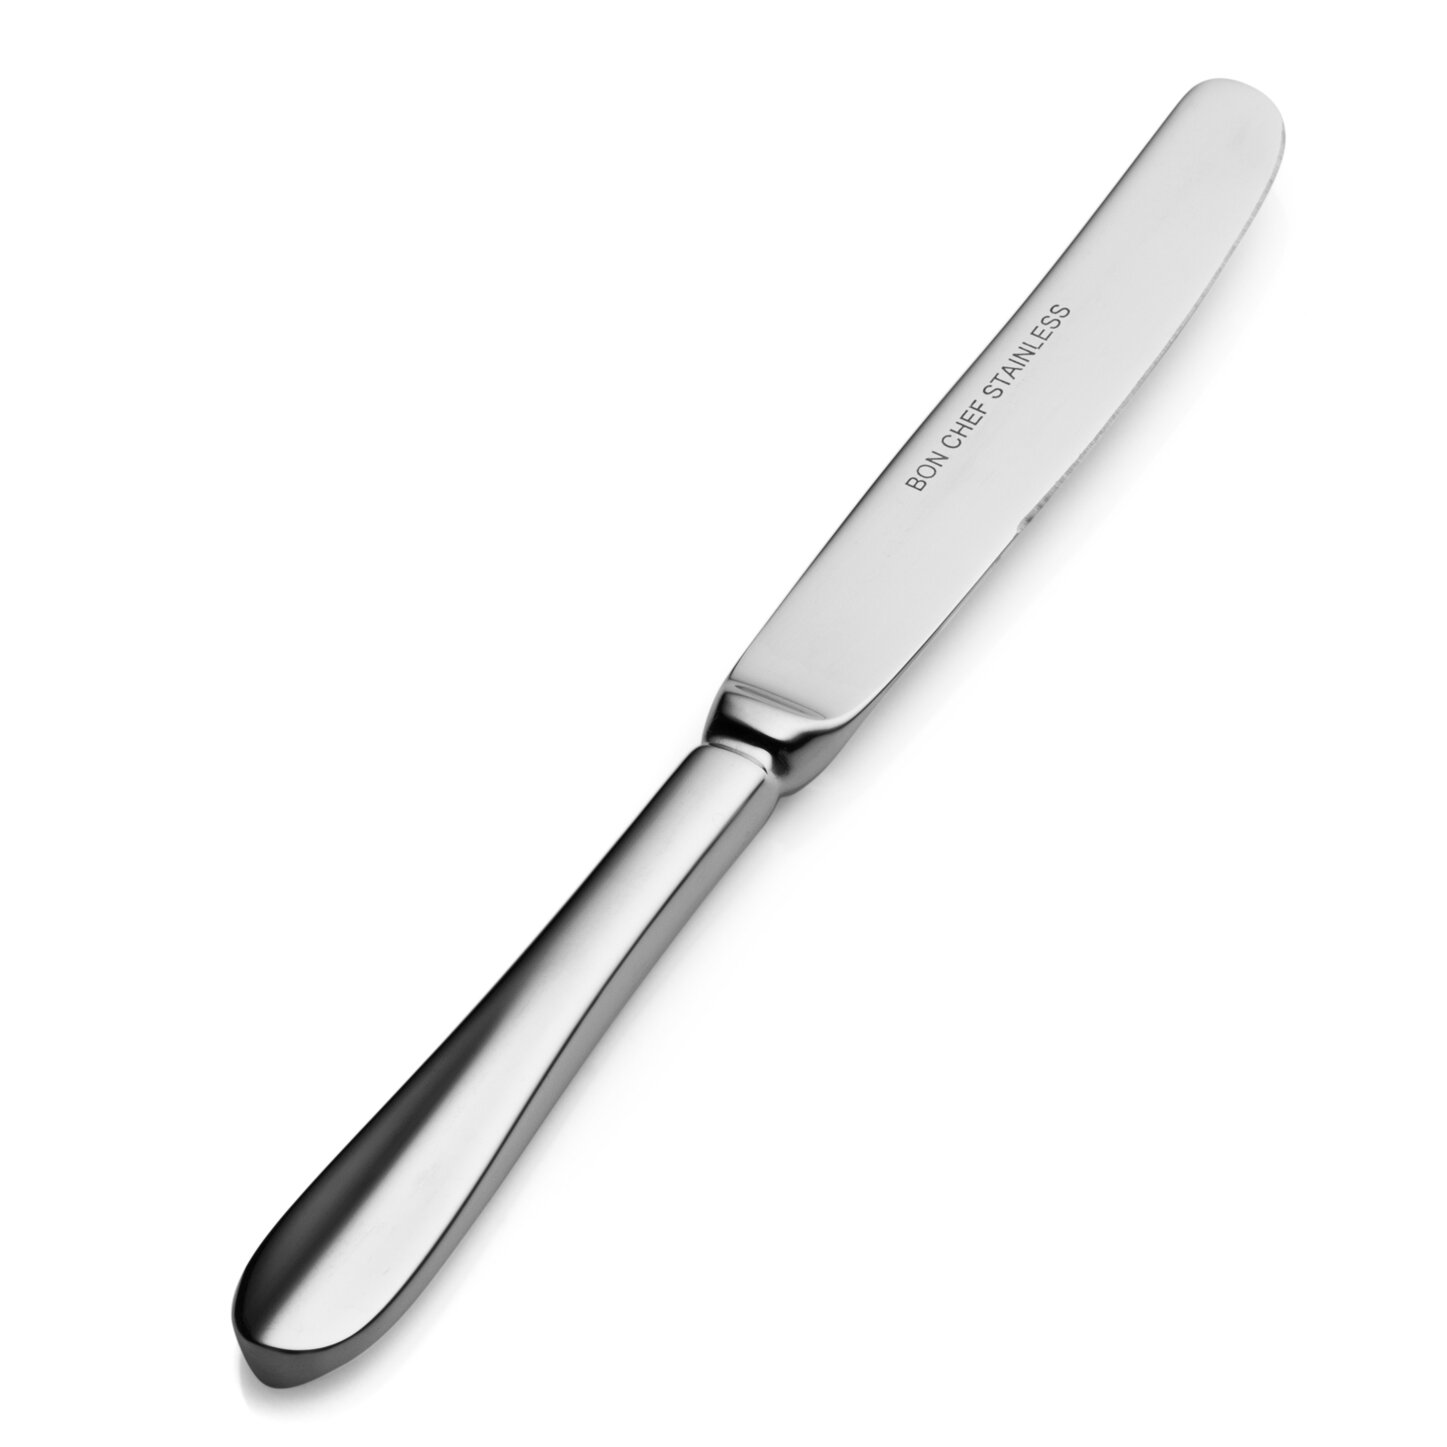 what does a butter knife look like